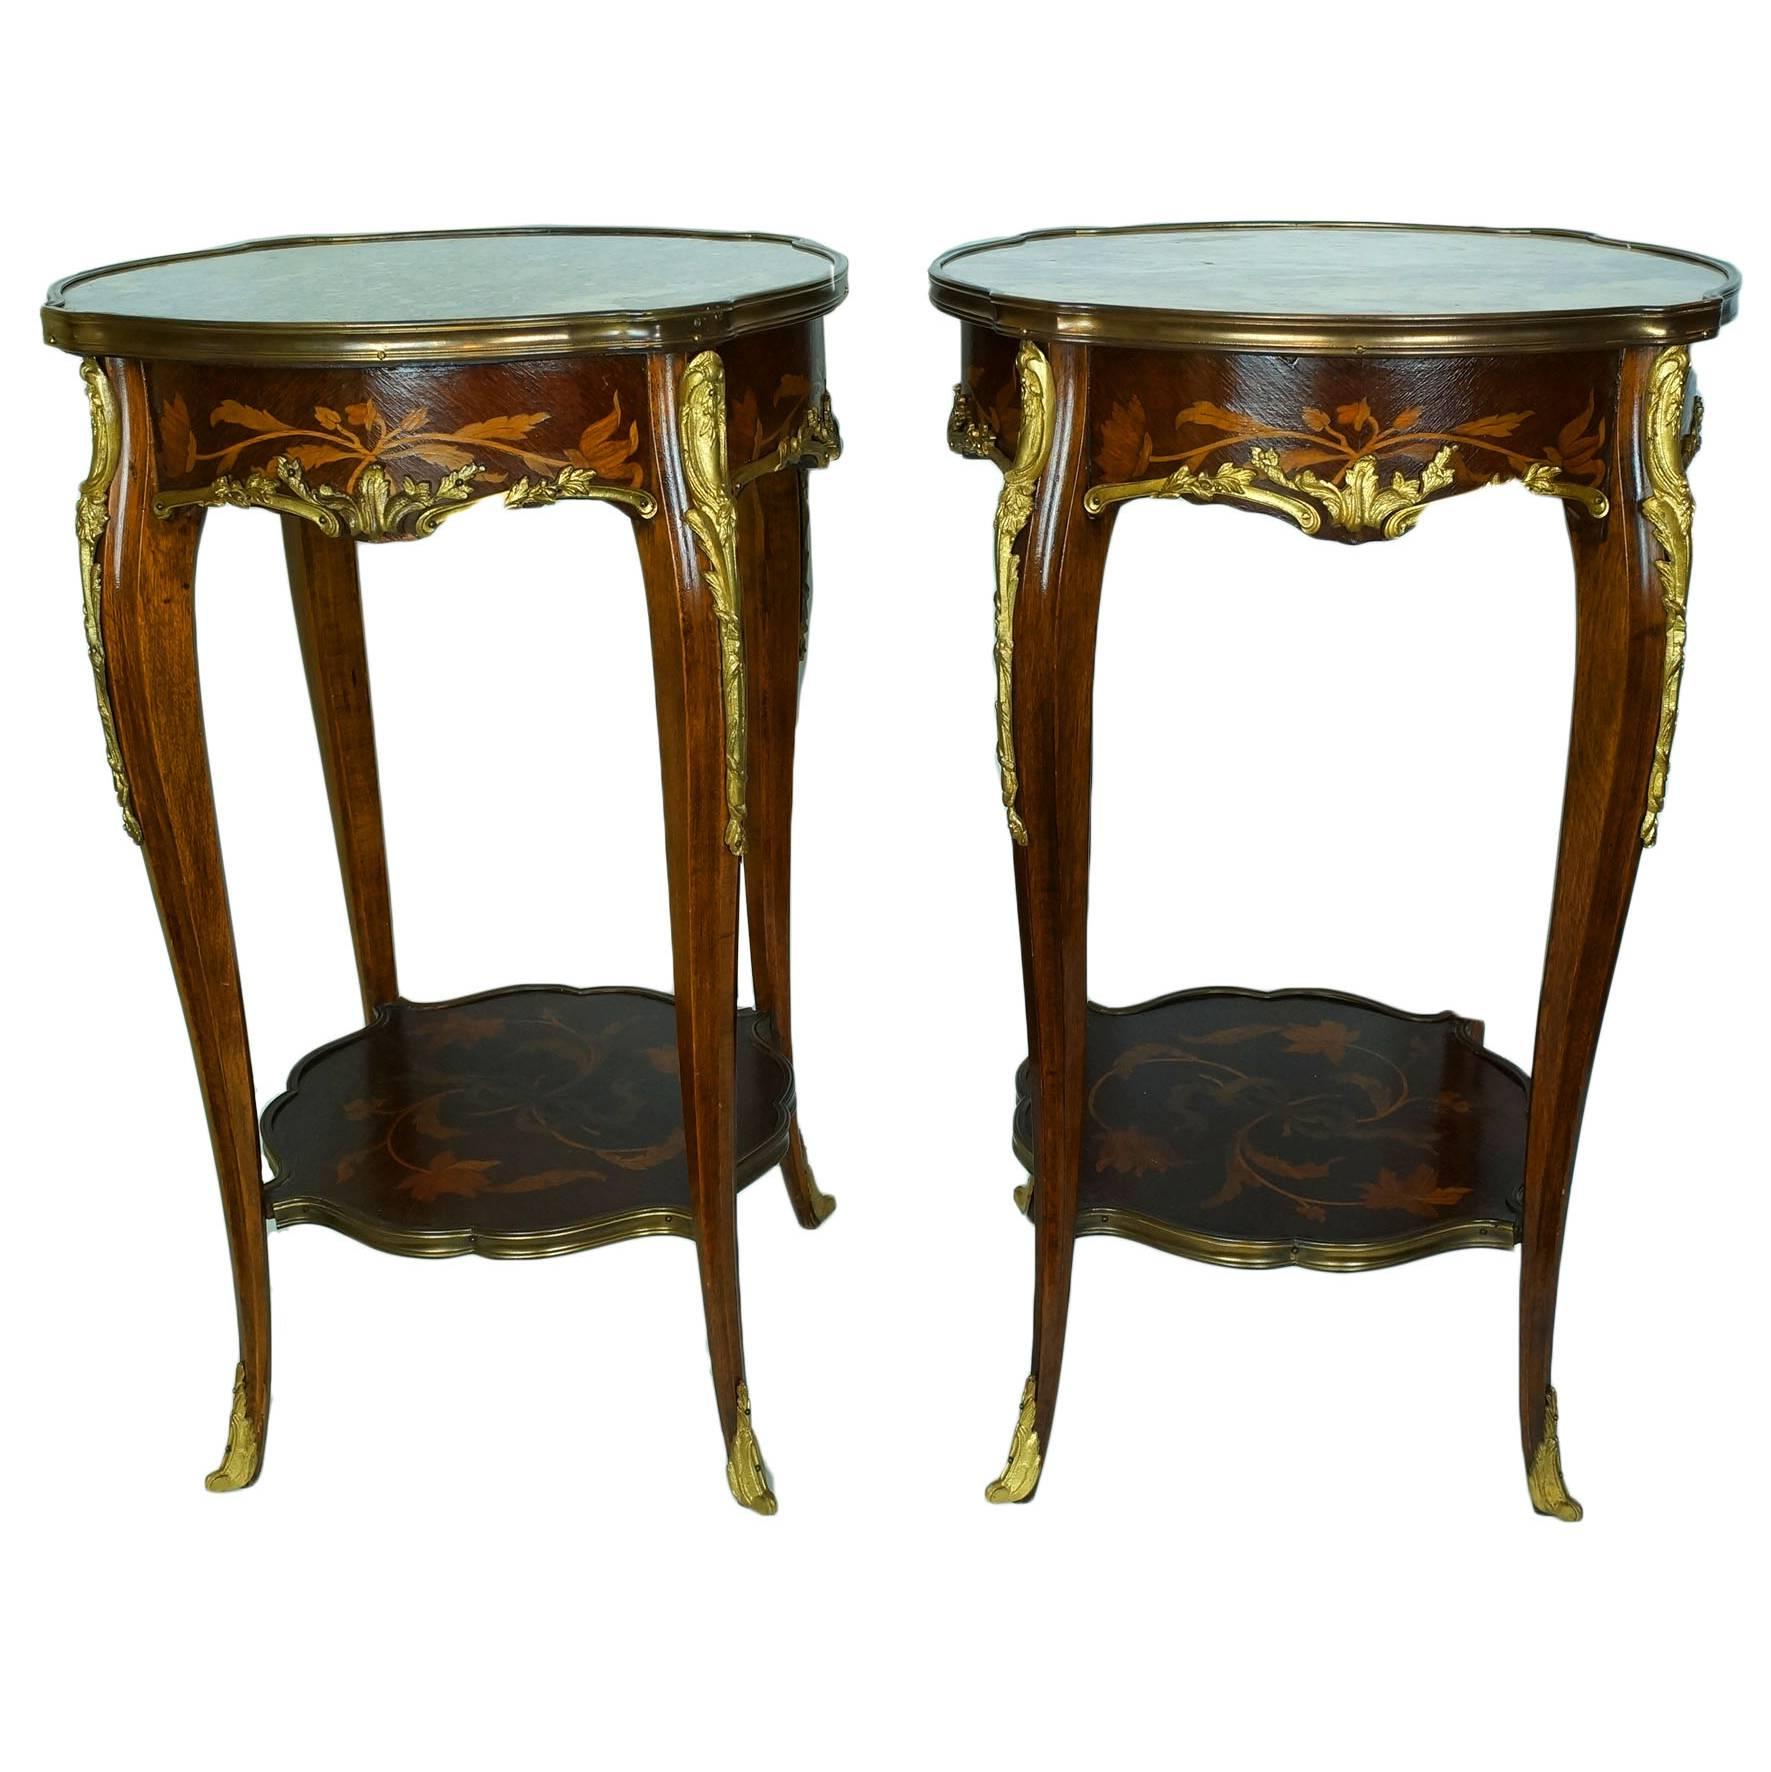  Pair of French  Louis XV style bronze mounted   Marquetry Inlaid Side Tables